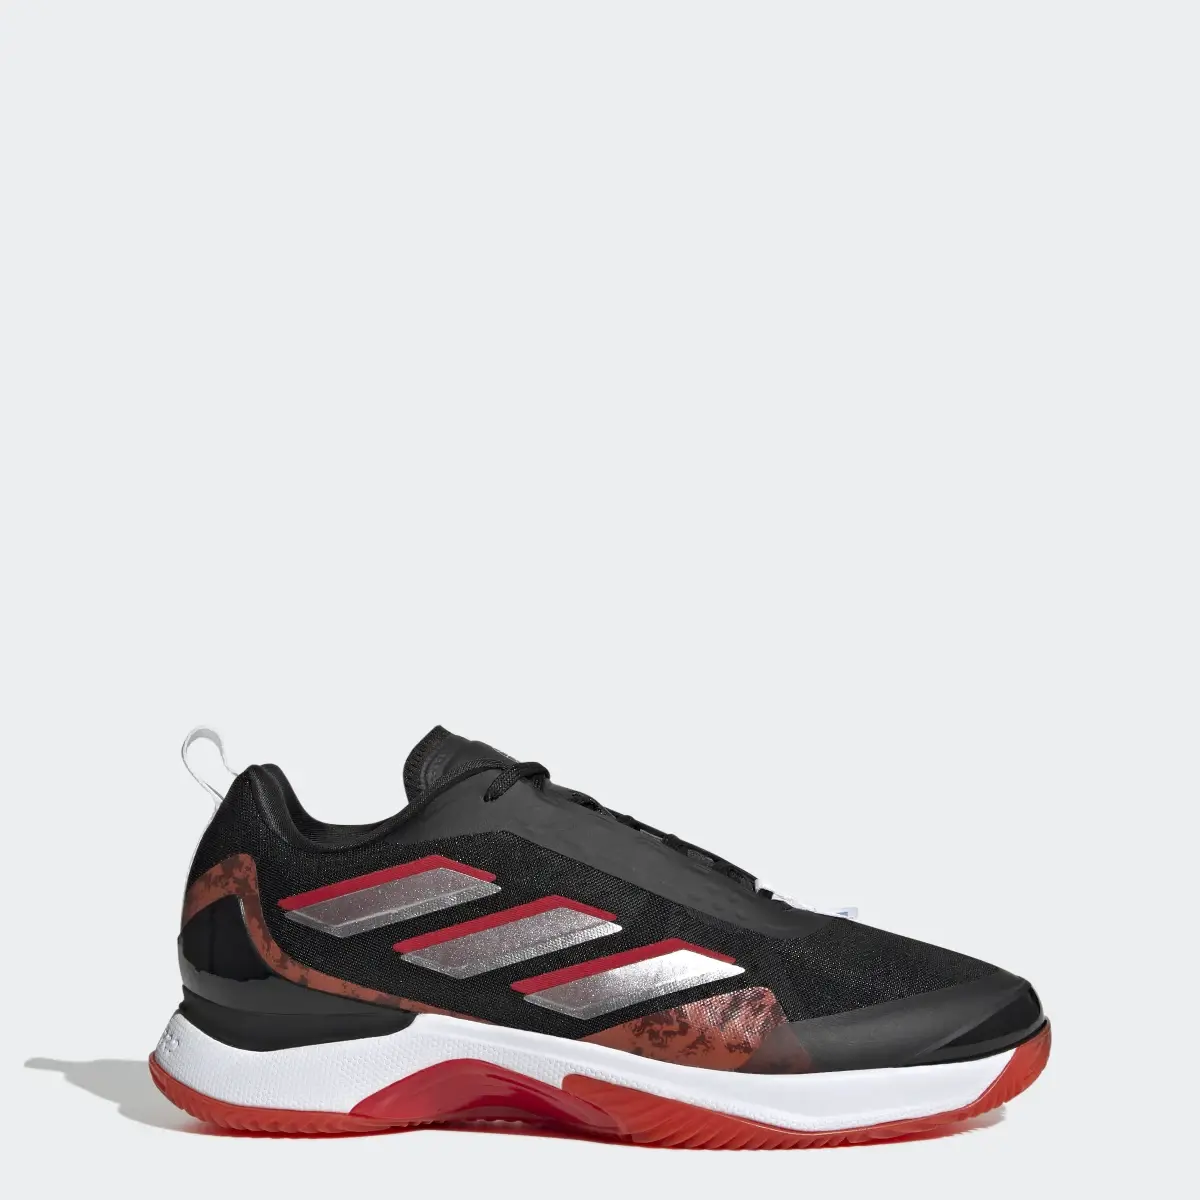 Adidas Avacourt Clay Court Tennis Shoes. 1